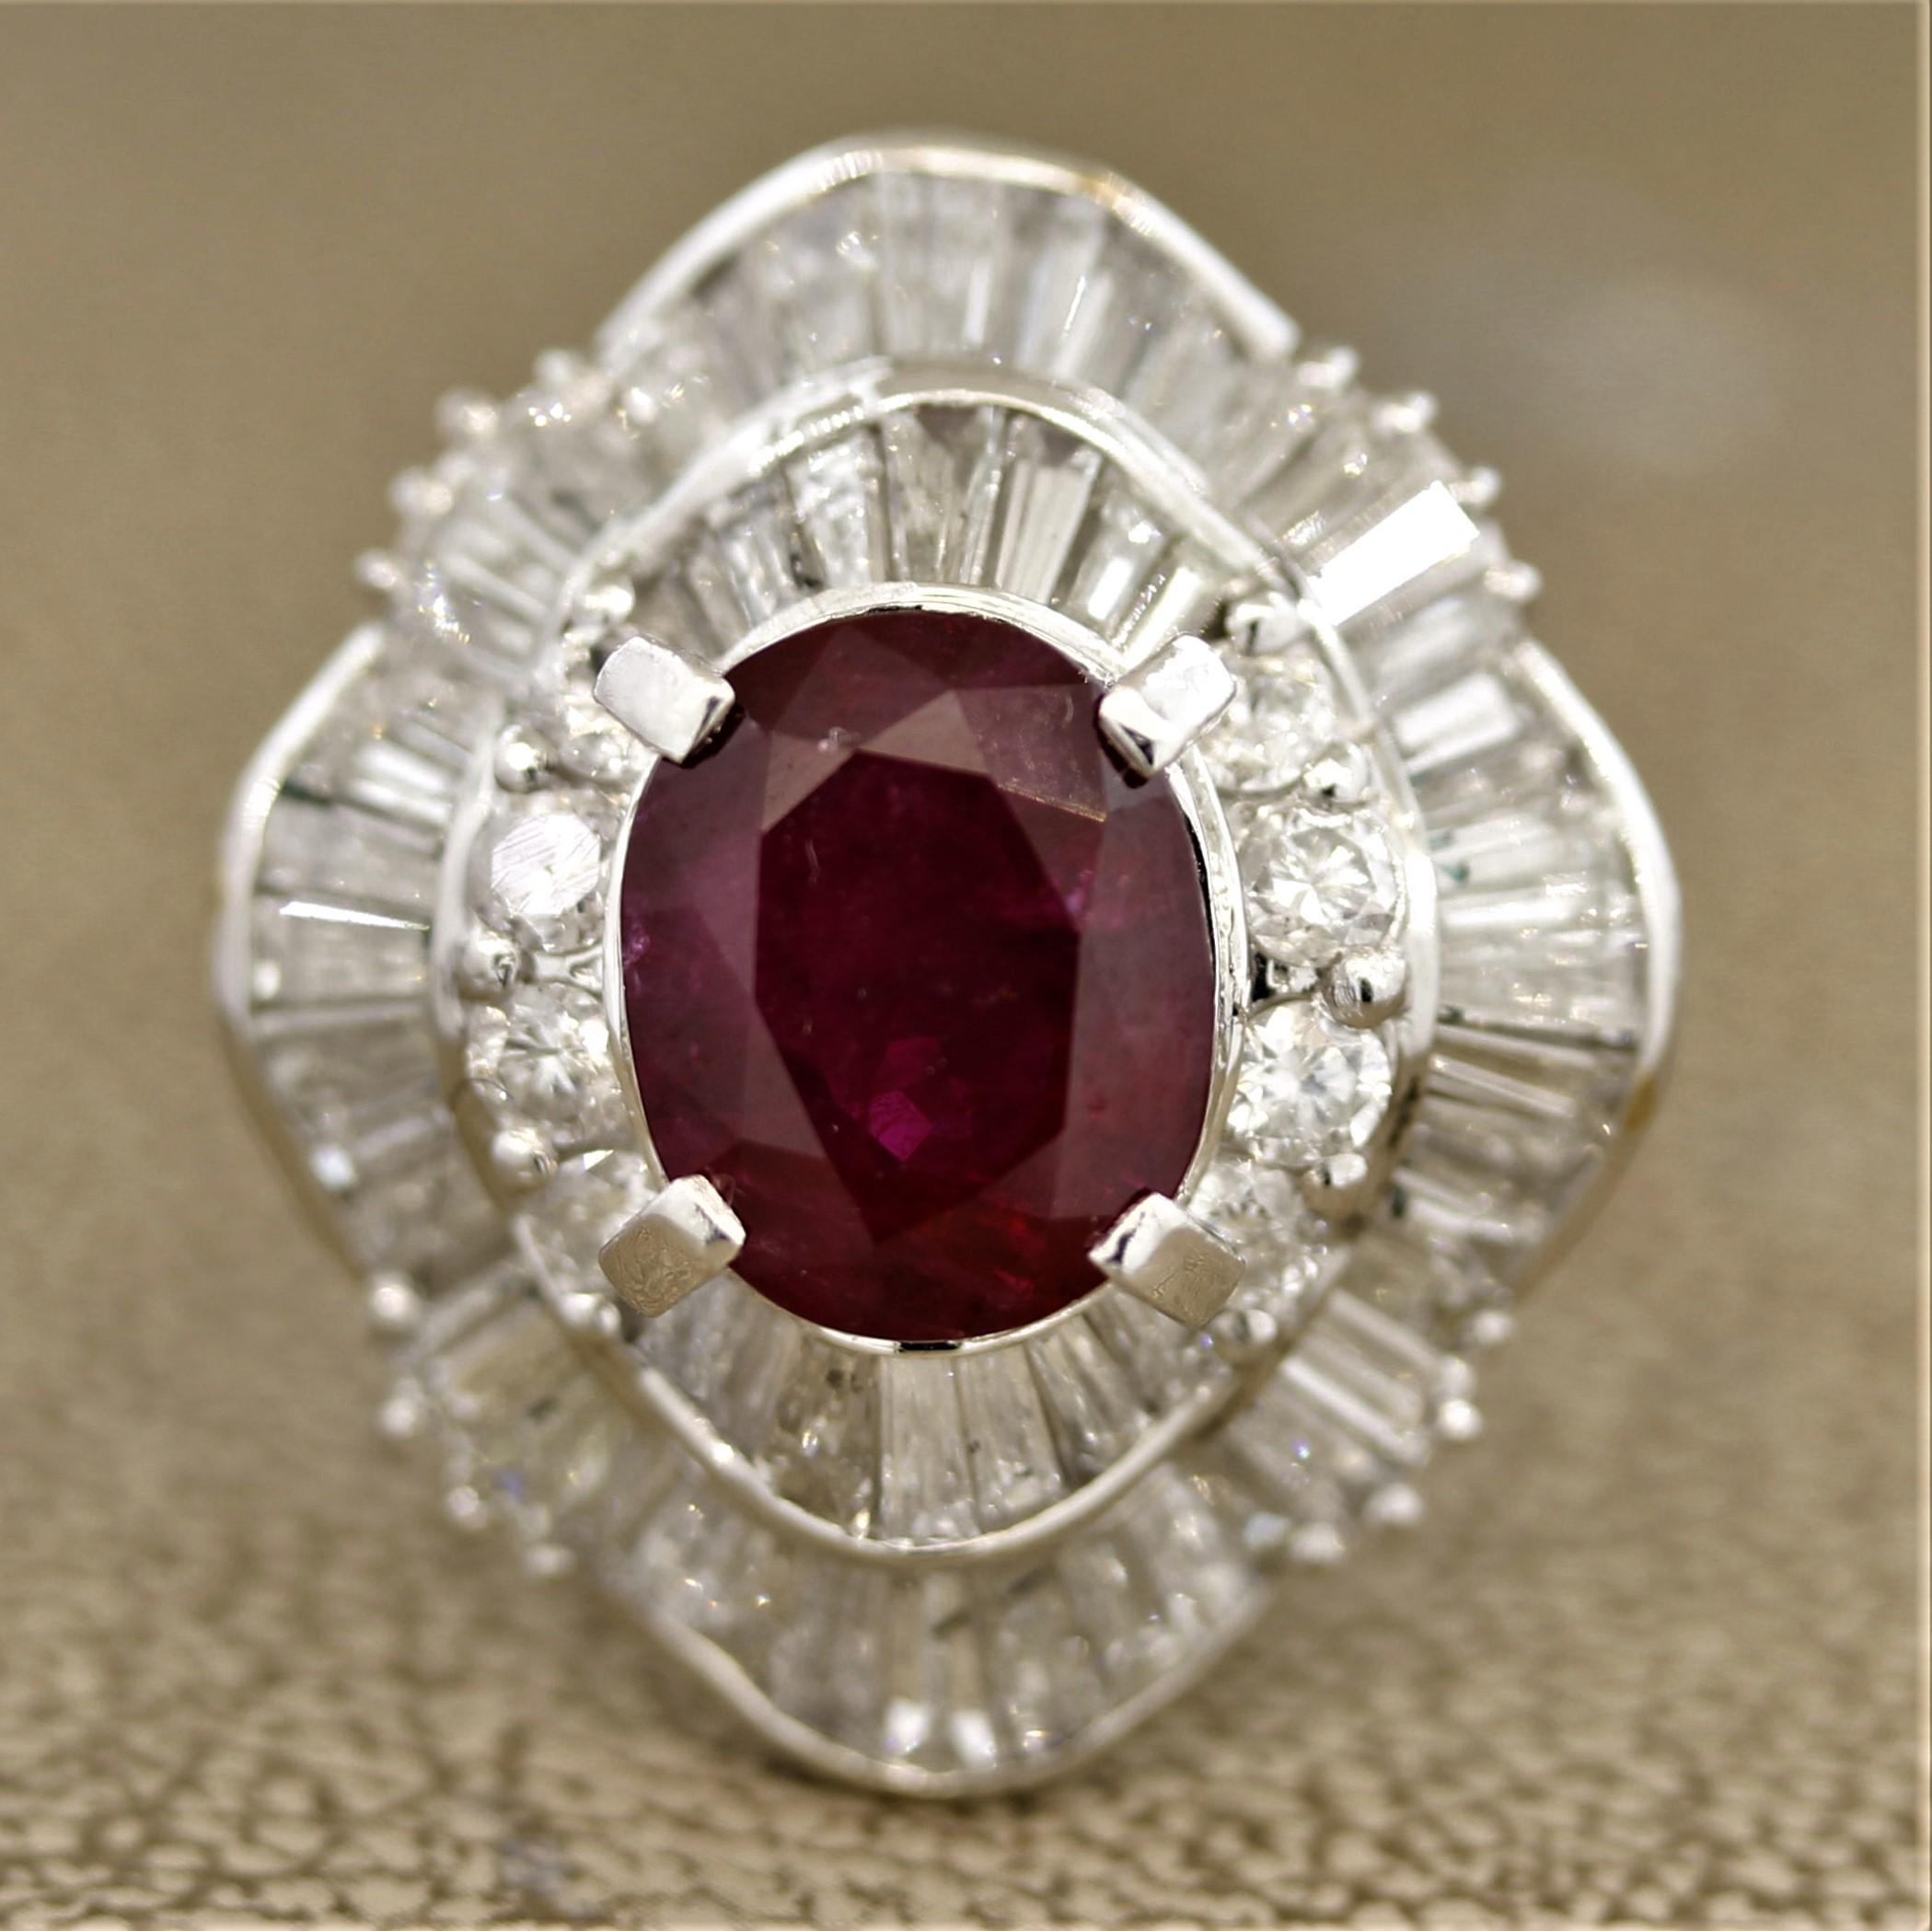 A wow piece! This large cocktail ring features a 3.58 carat ruby with a deep royal red color and is cut as an oval shape. It is accented by 3.05 carats of round brilliant and baguette cut diamonds set around the ruby in a stylish pattern.